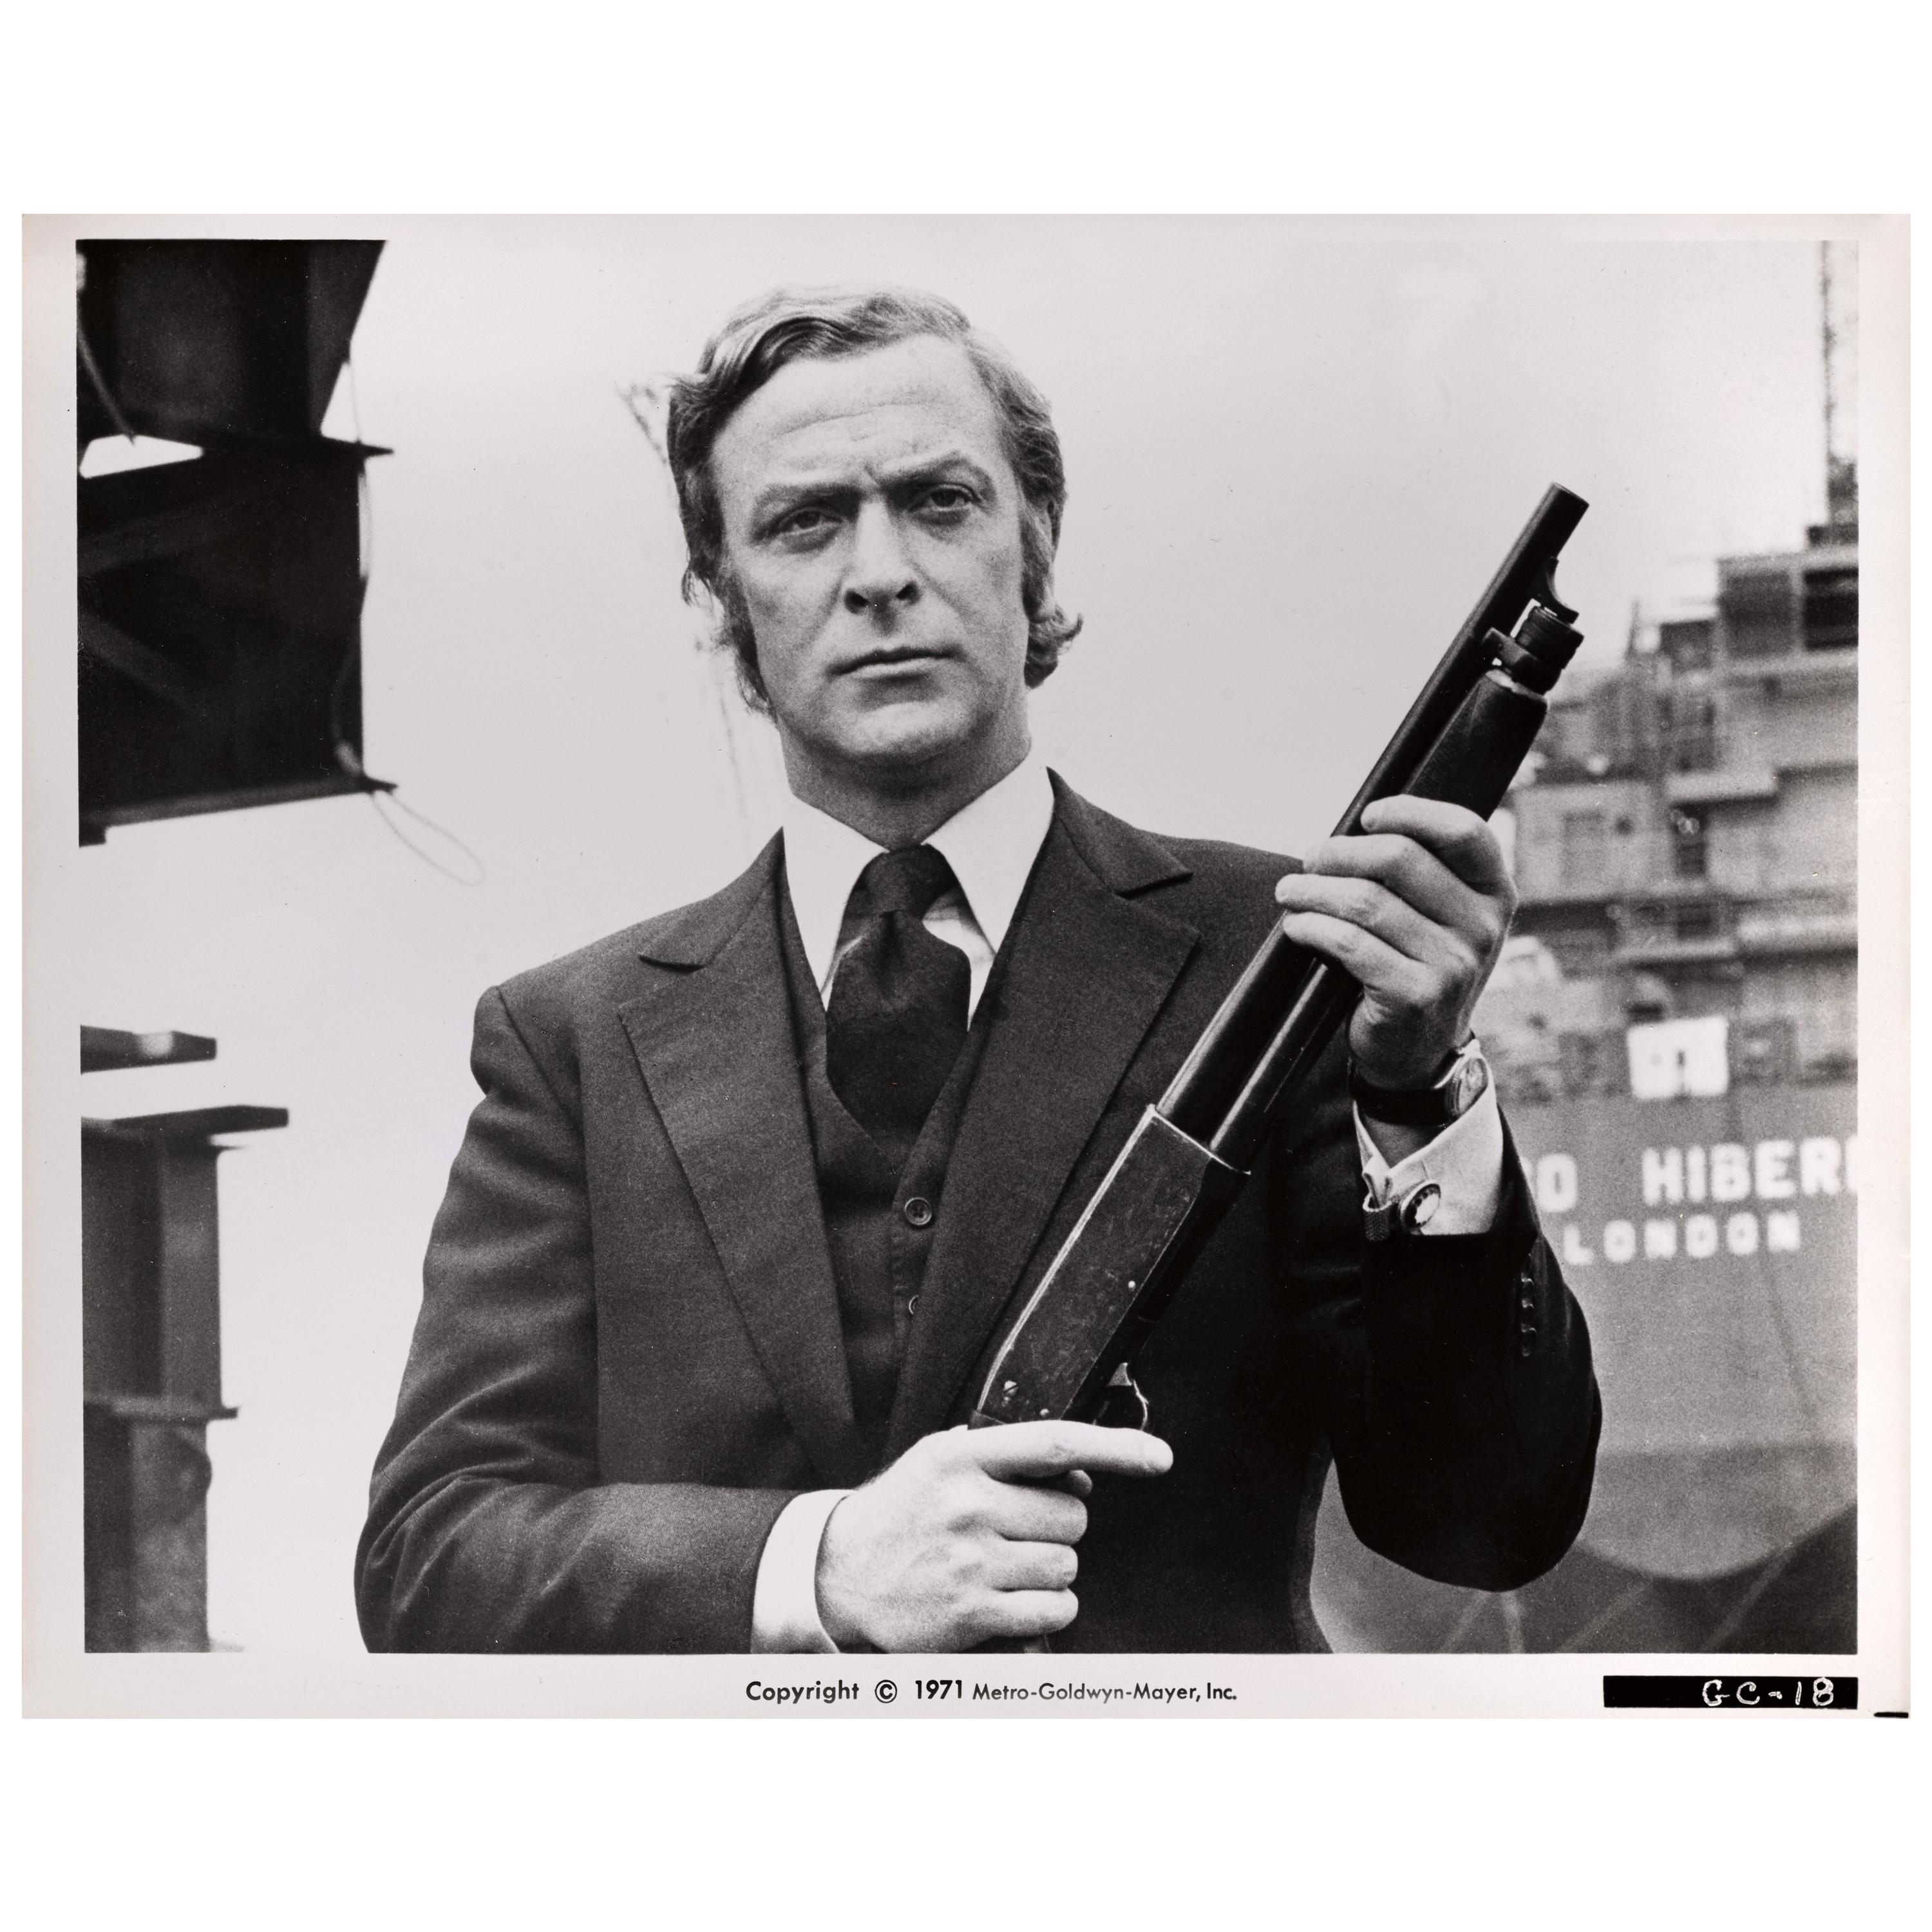 Michael Caine As Jack Carter Get Carter 11x17 Mini Poster Suit Holding Rifle